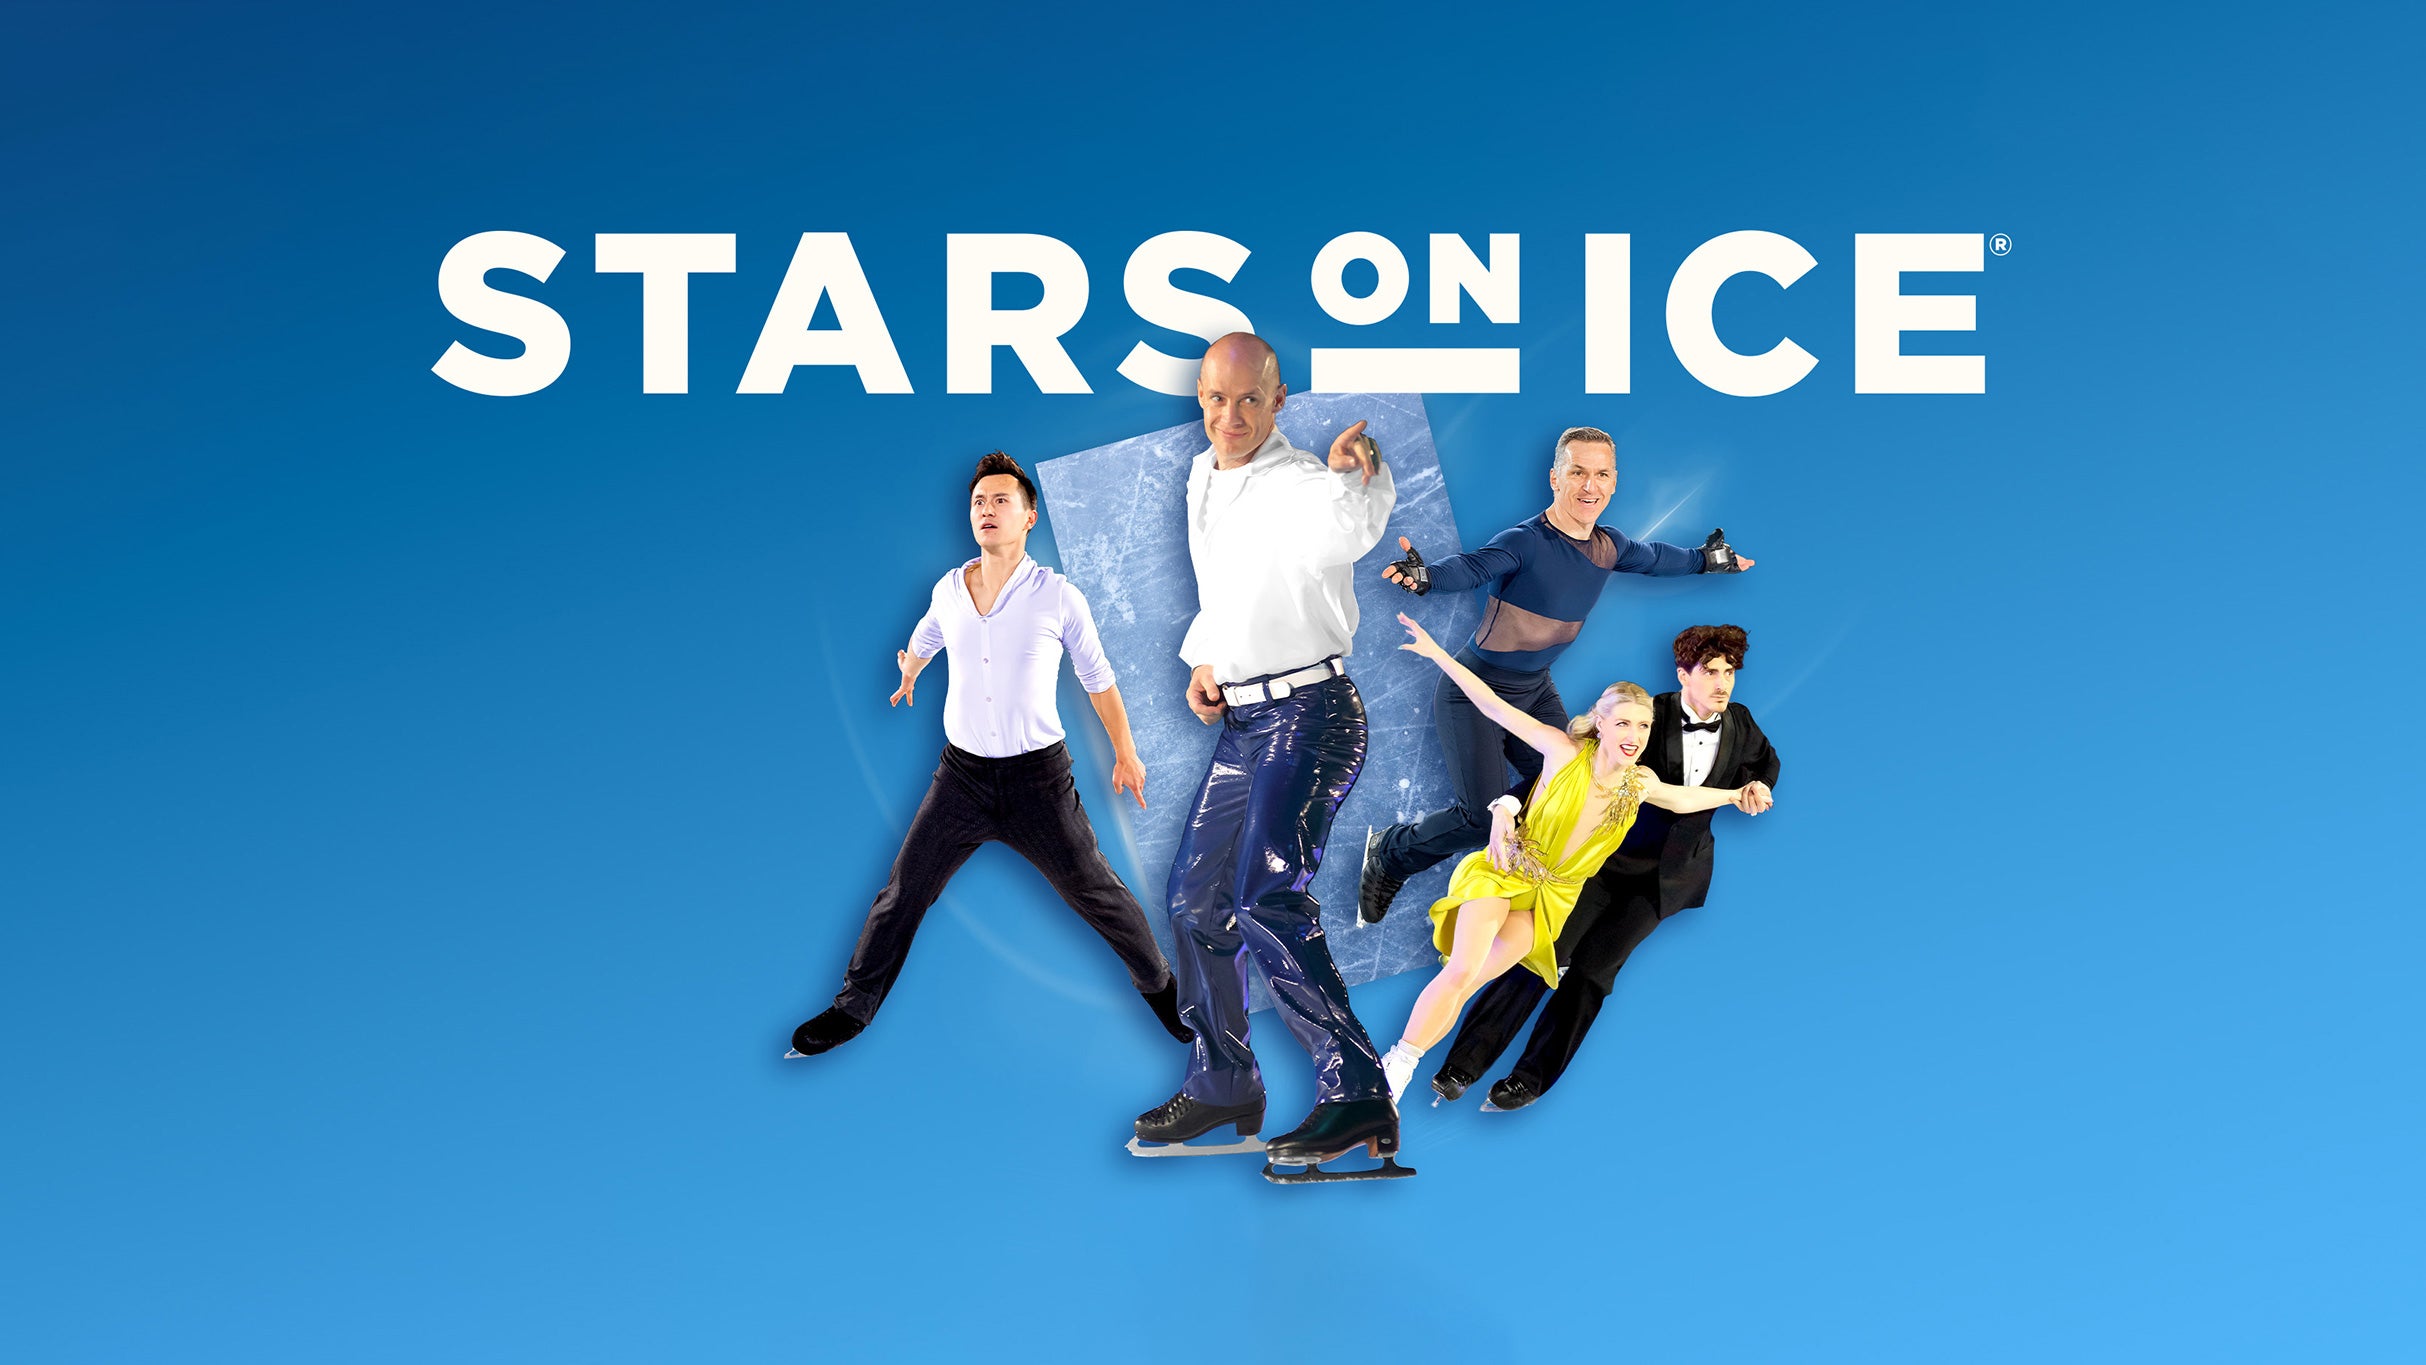 Stars on Ice - Canada in Saskatoon promo photo for Family Discount presale offer code